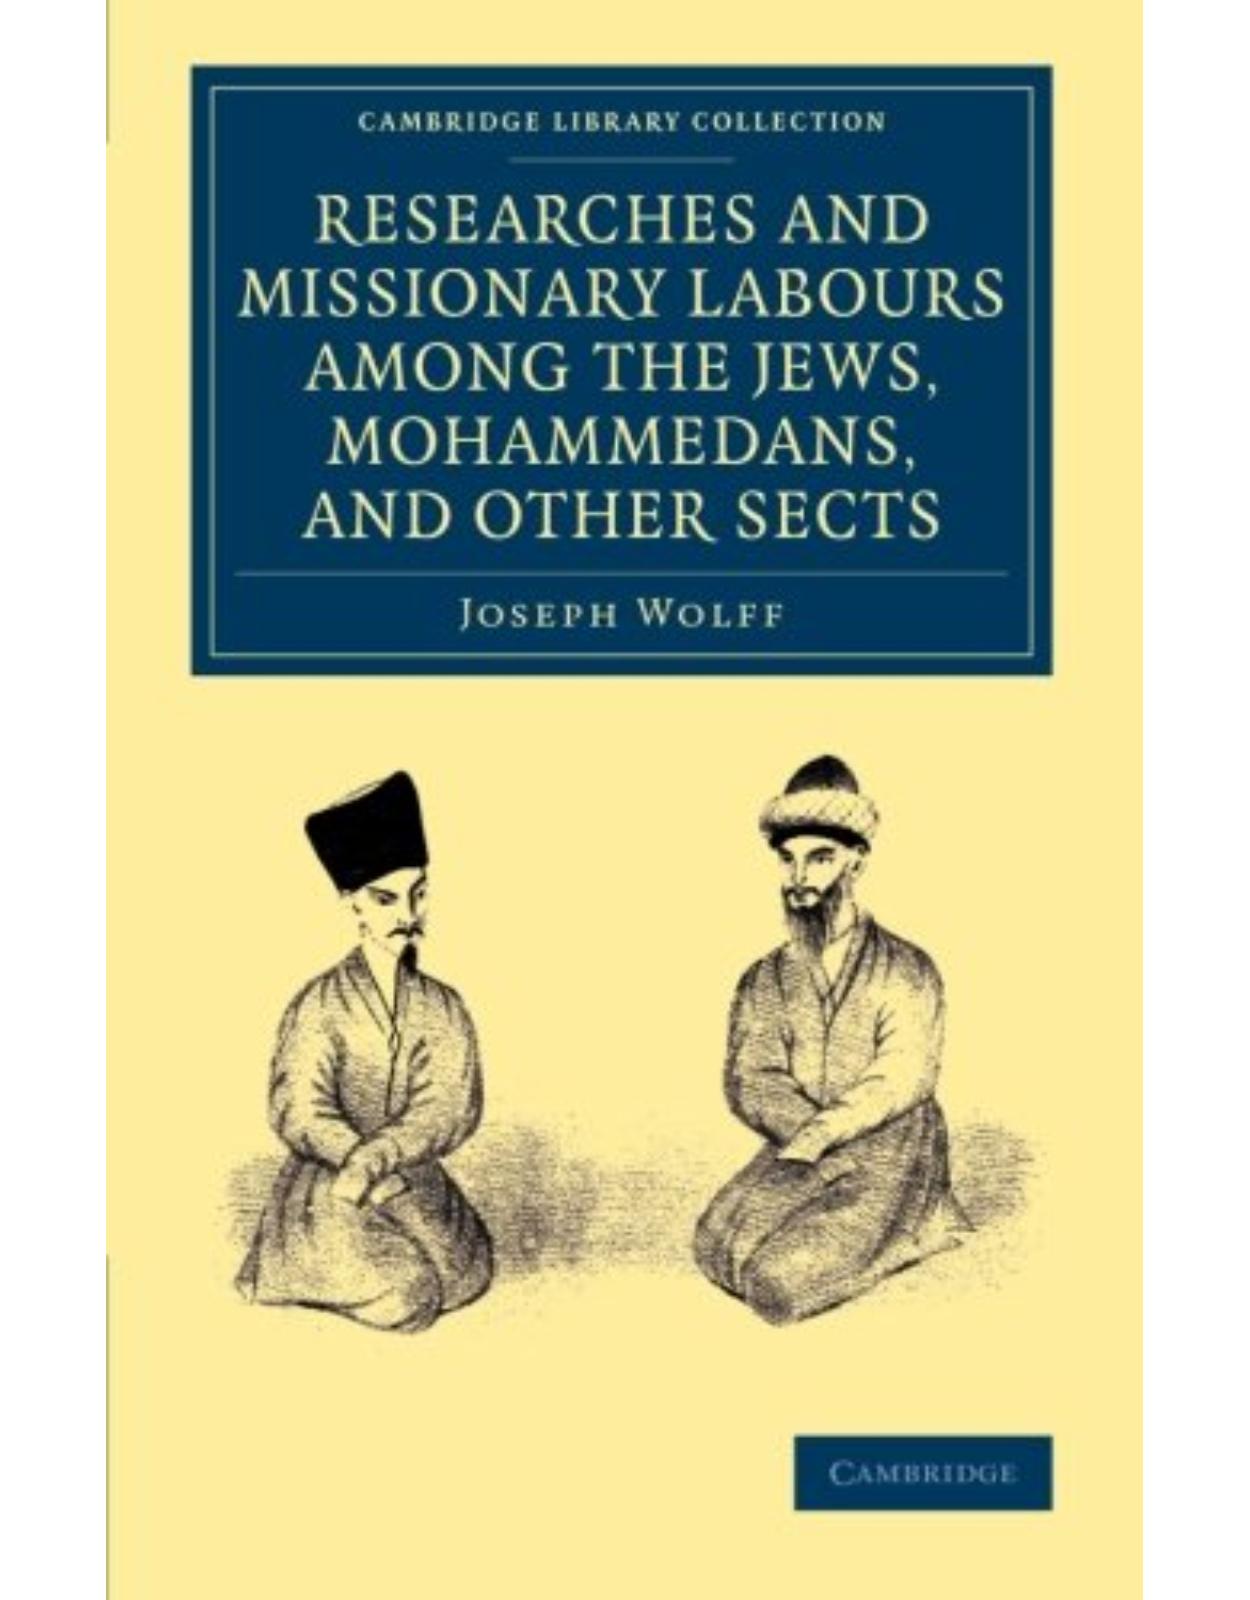 Researches and Missionary Labours among the Jews, Mohammedans, and Other Sects (Cambridge Library Collection - South Asian History)